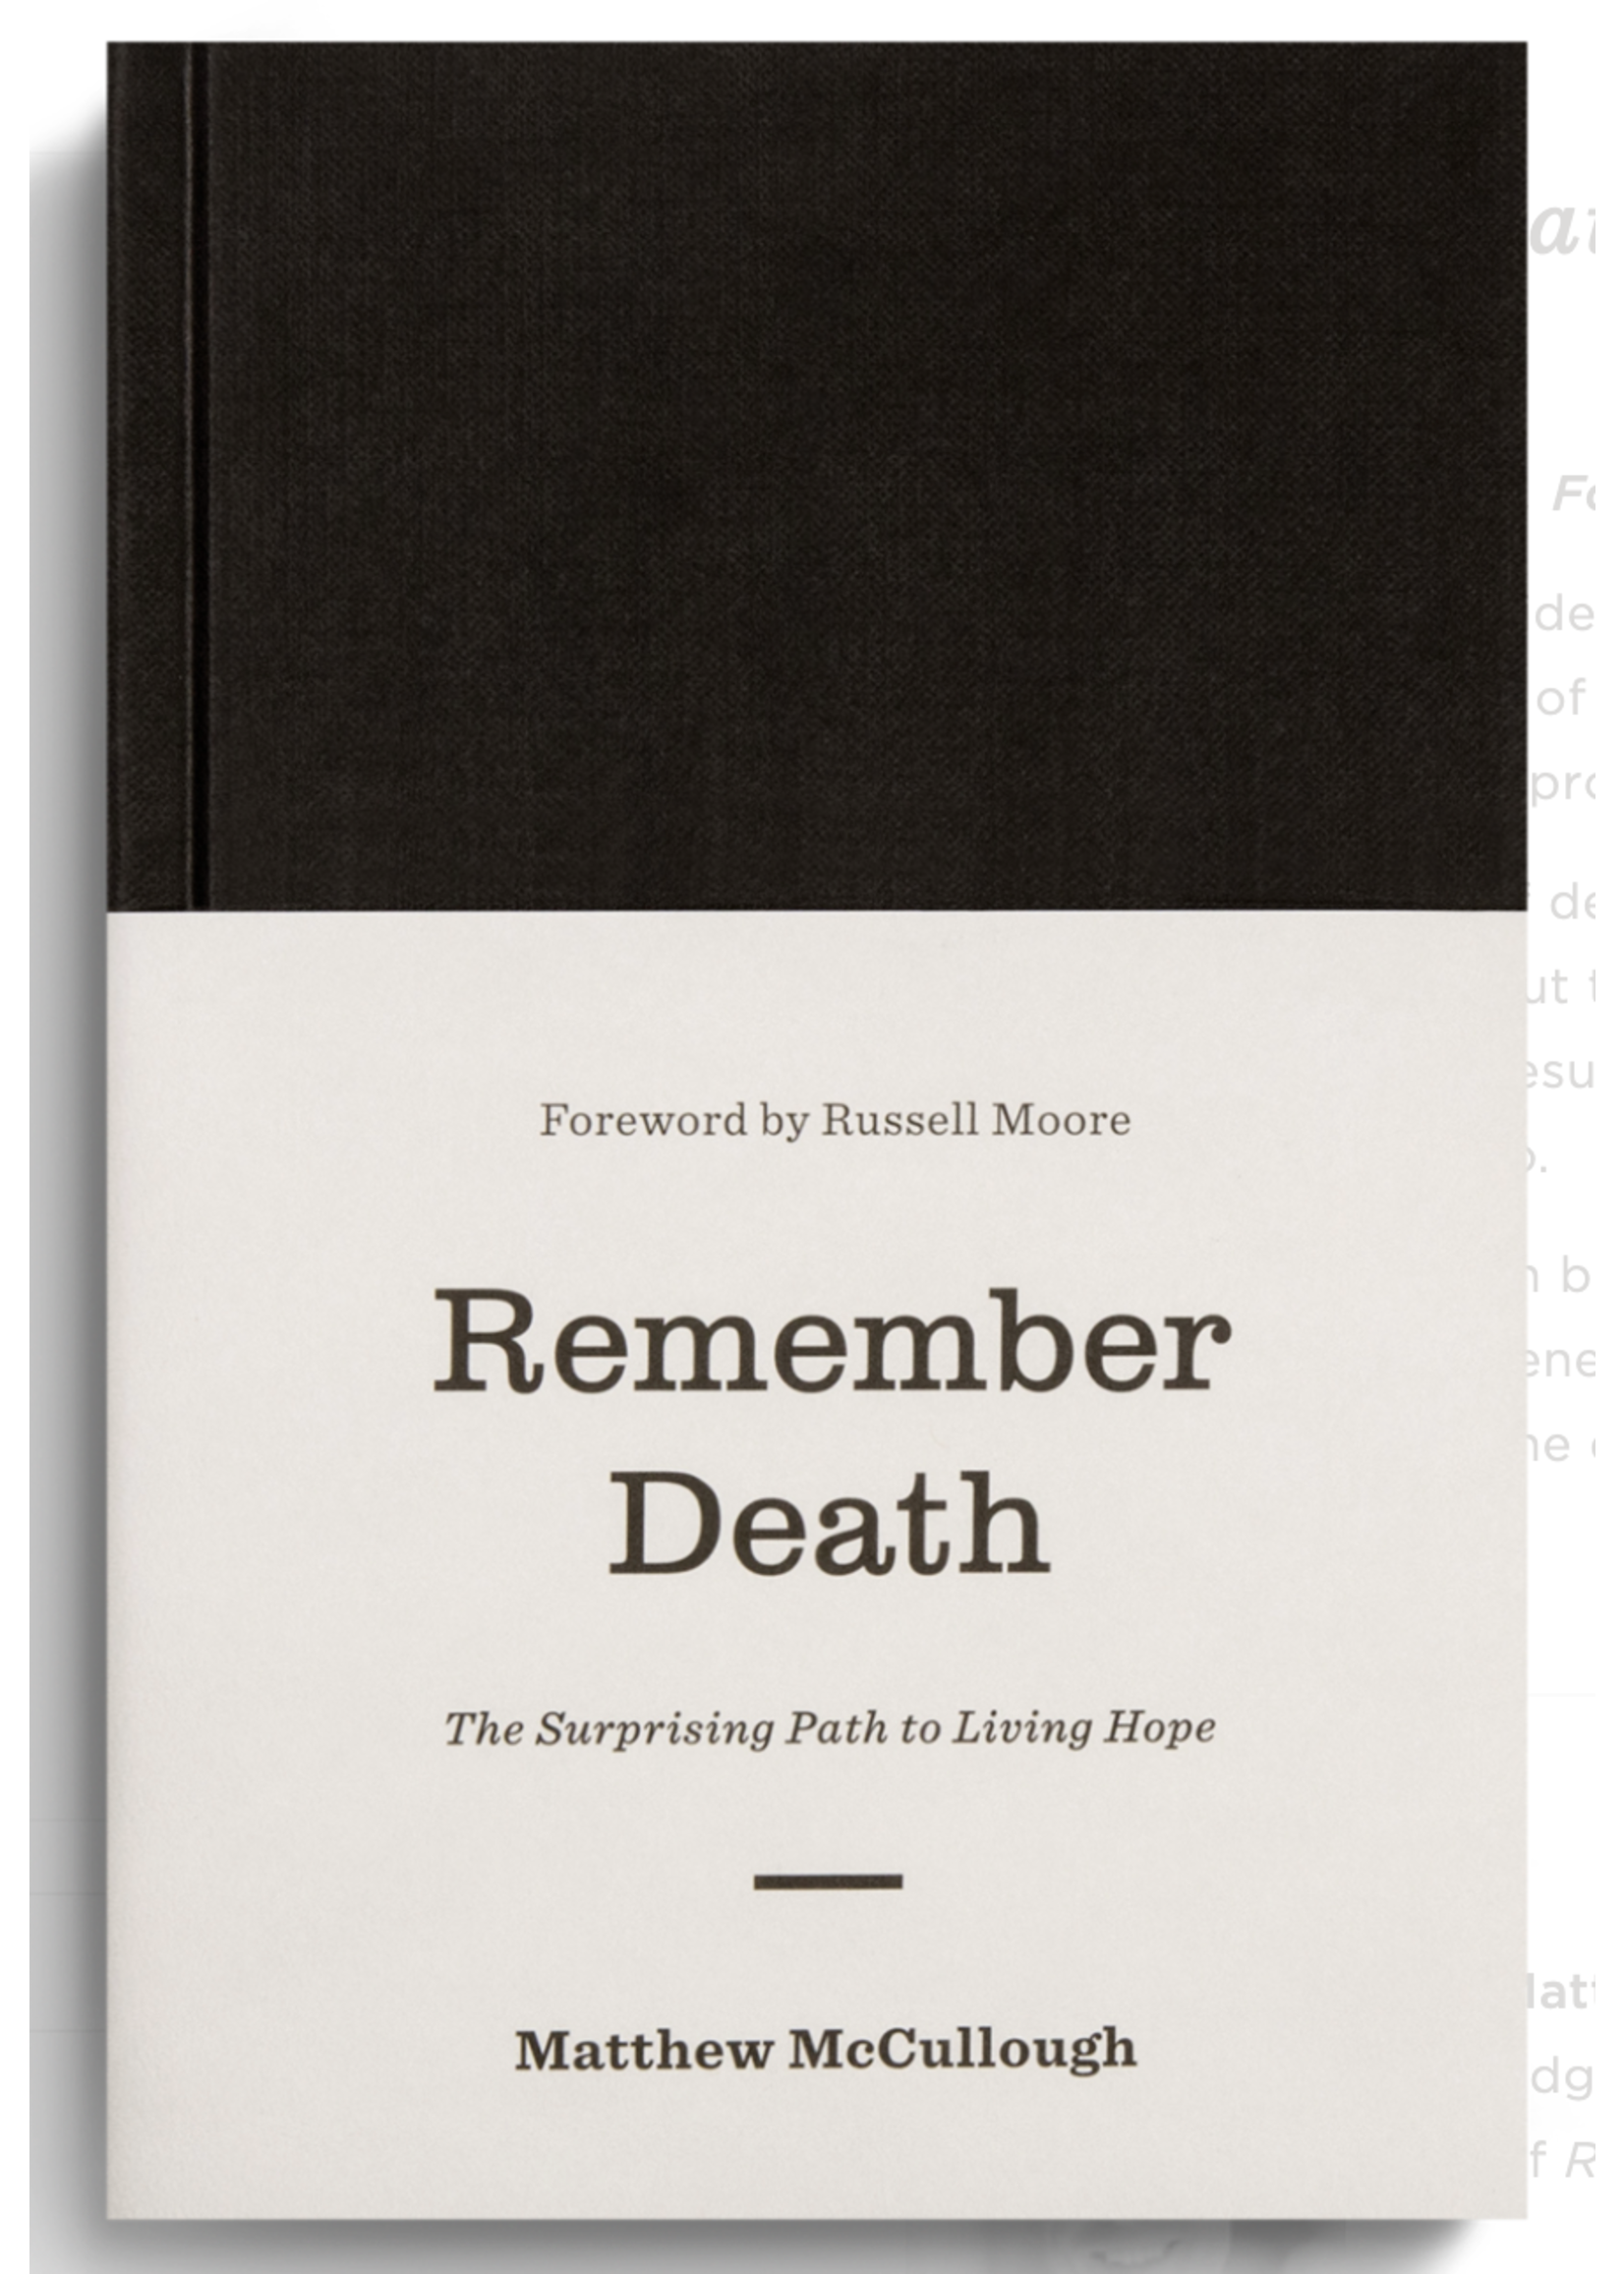 Remember Death: The Surprising Path to Living Hope [Matthew McCullough]